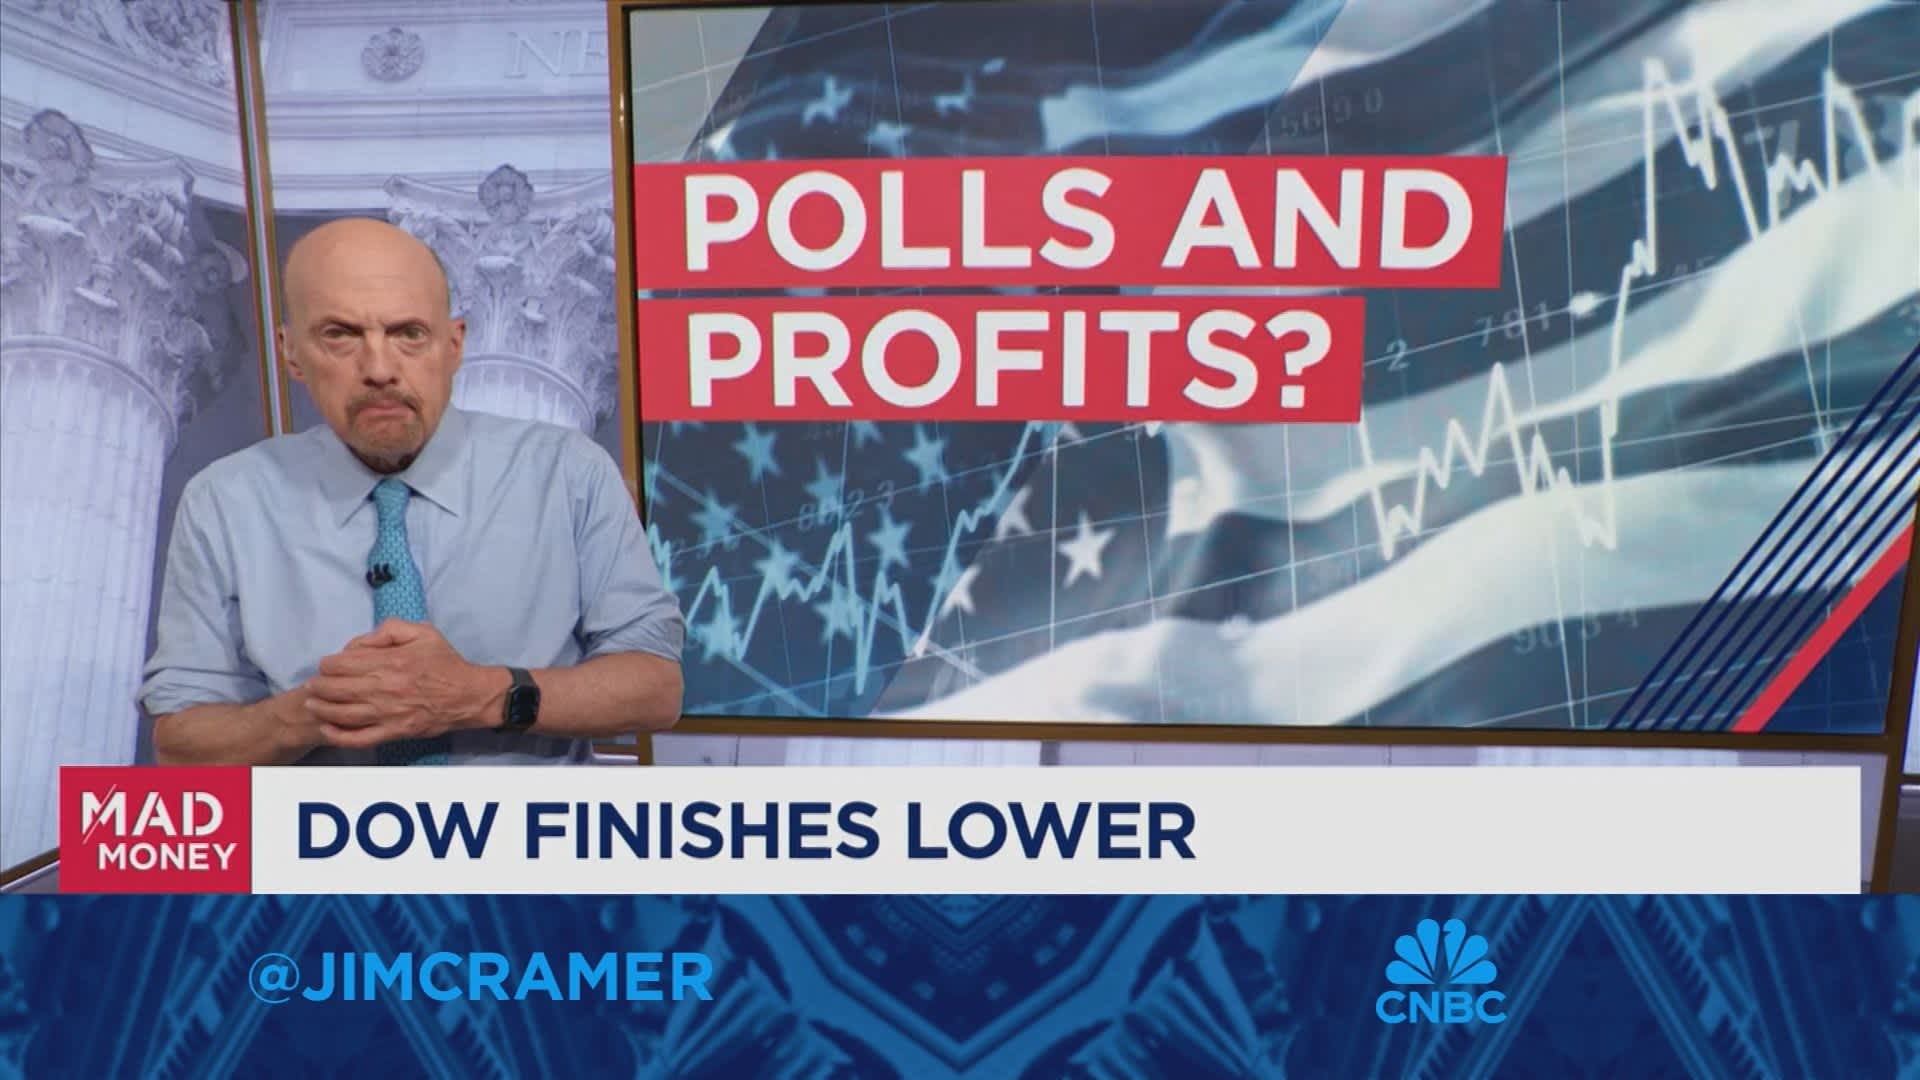 Political party differences will impact vast swathes of the stock market, says Jim Cramer